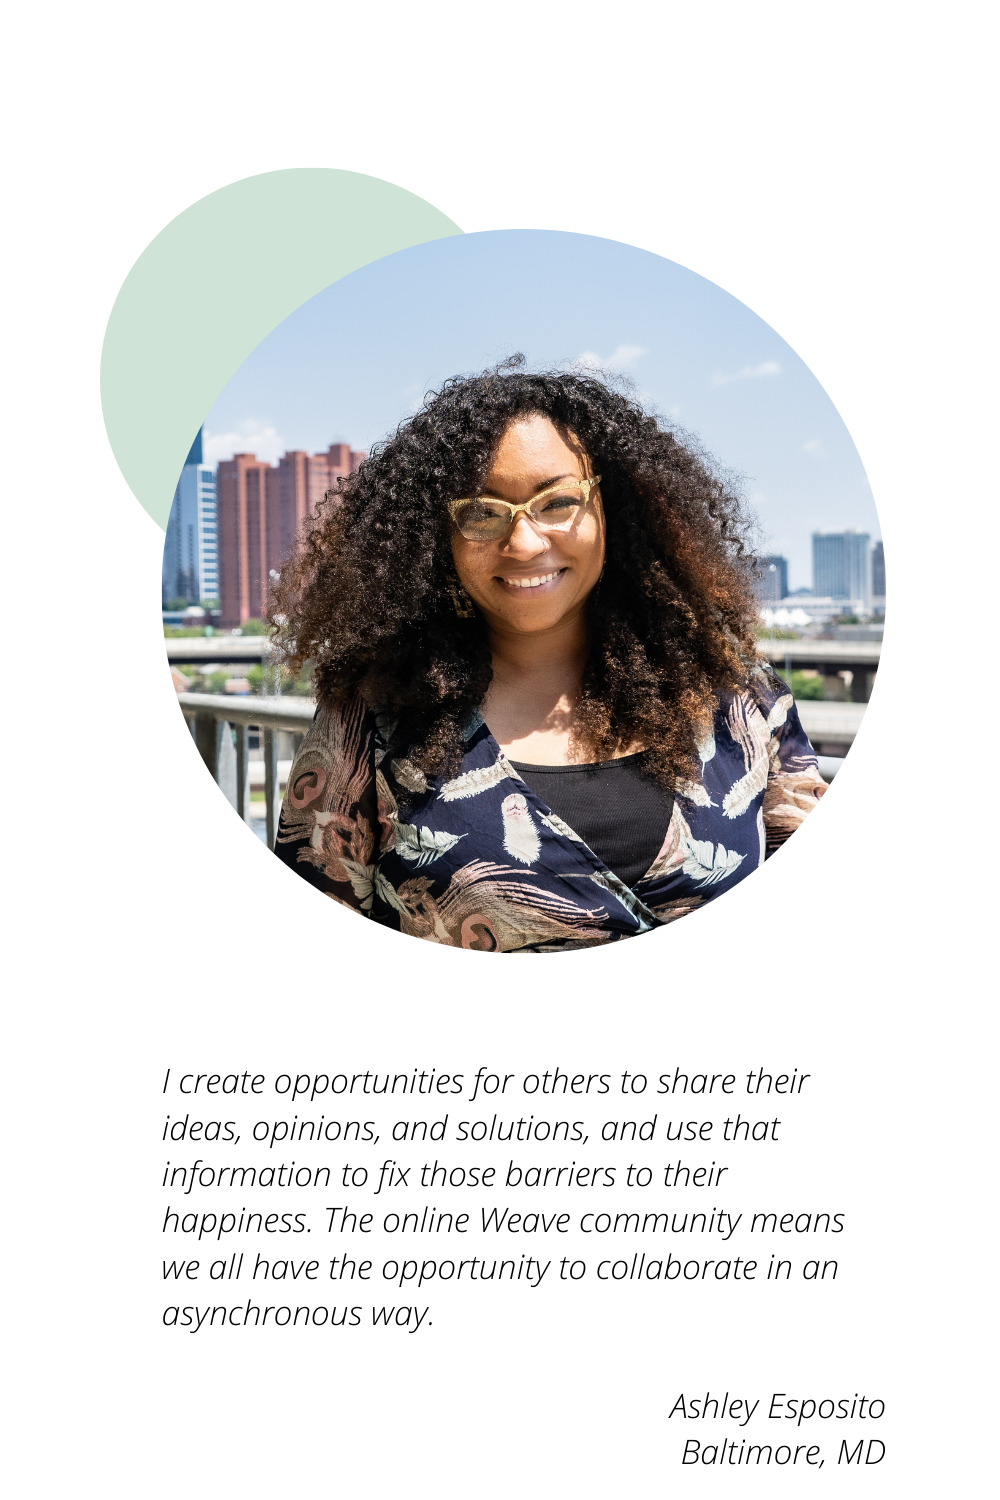 Ashley Esposito of Baltimore, MD: I create opportunities for others to share their ideas, opinions, and solutions, and use that information to fix those barriers to their happiness. The online Weave community means we all have the opportunity to collaborate in an asynchronous way.